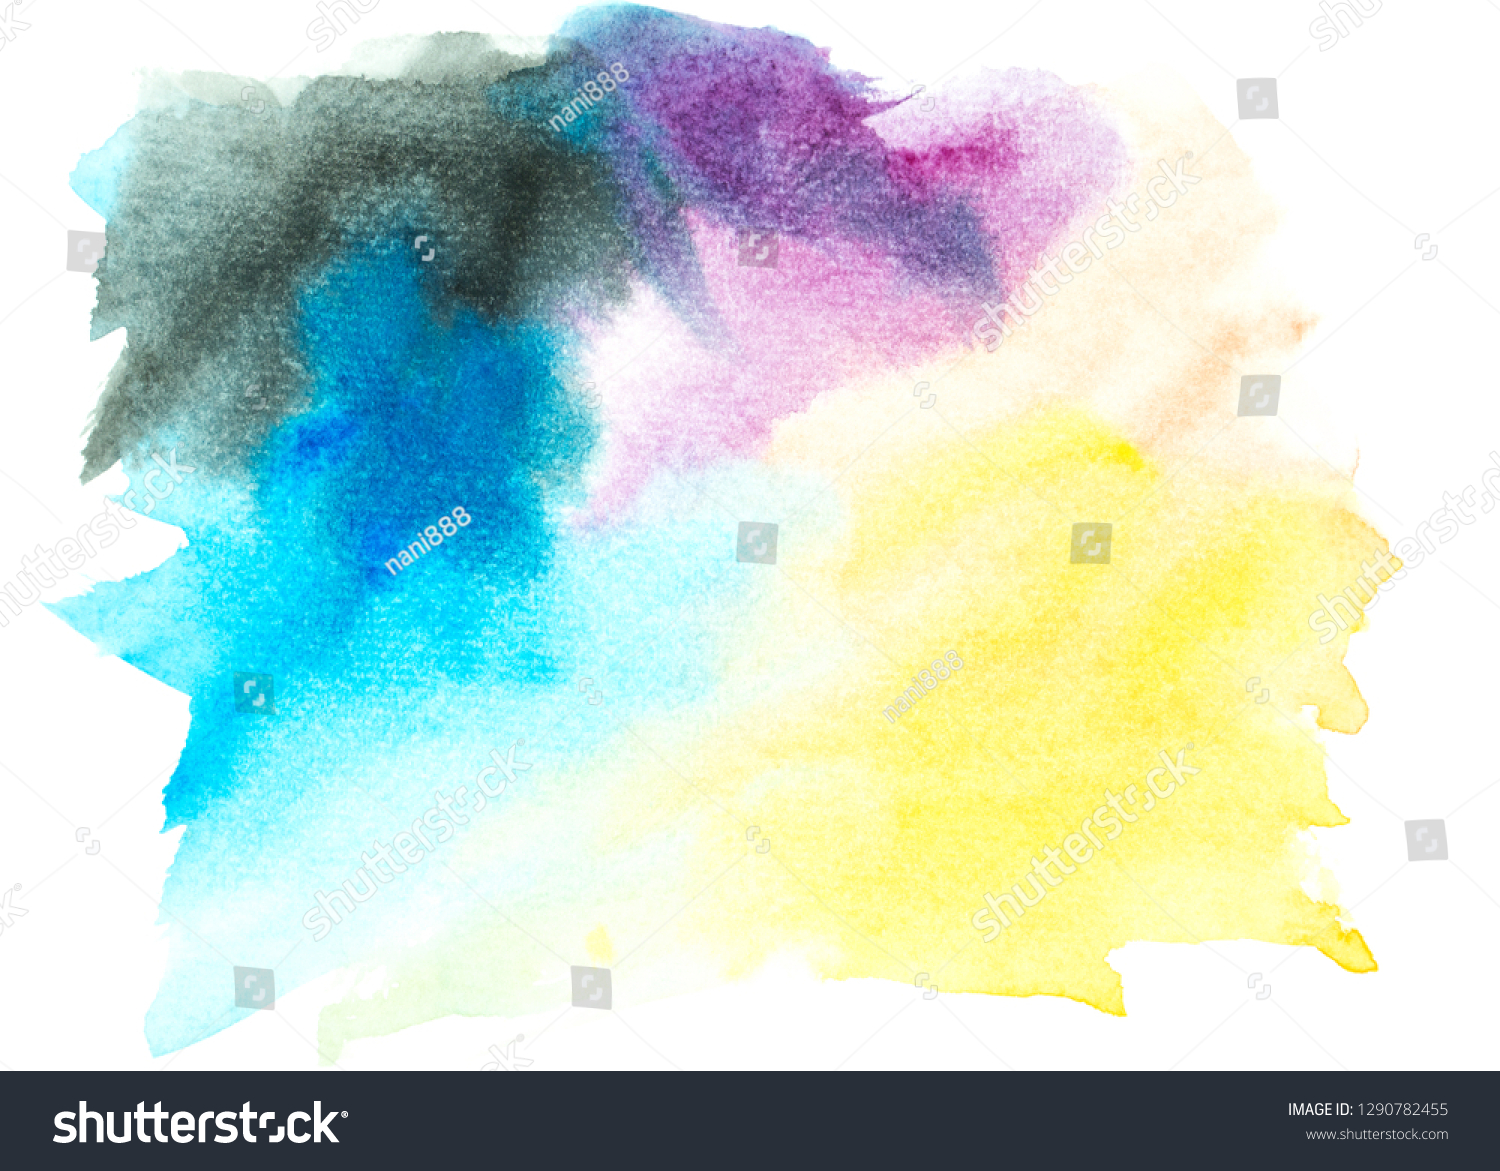 Watercolor Painting Ideas Colorful Shades Background Stock Illustration 1290782455